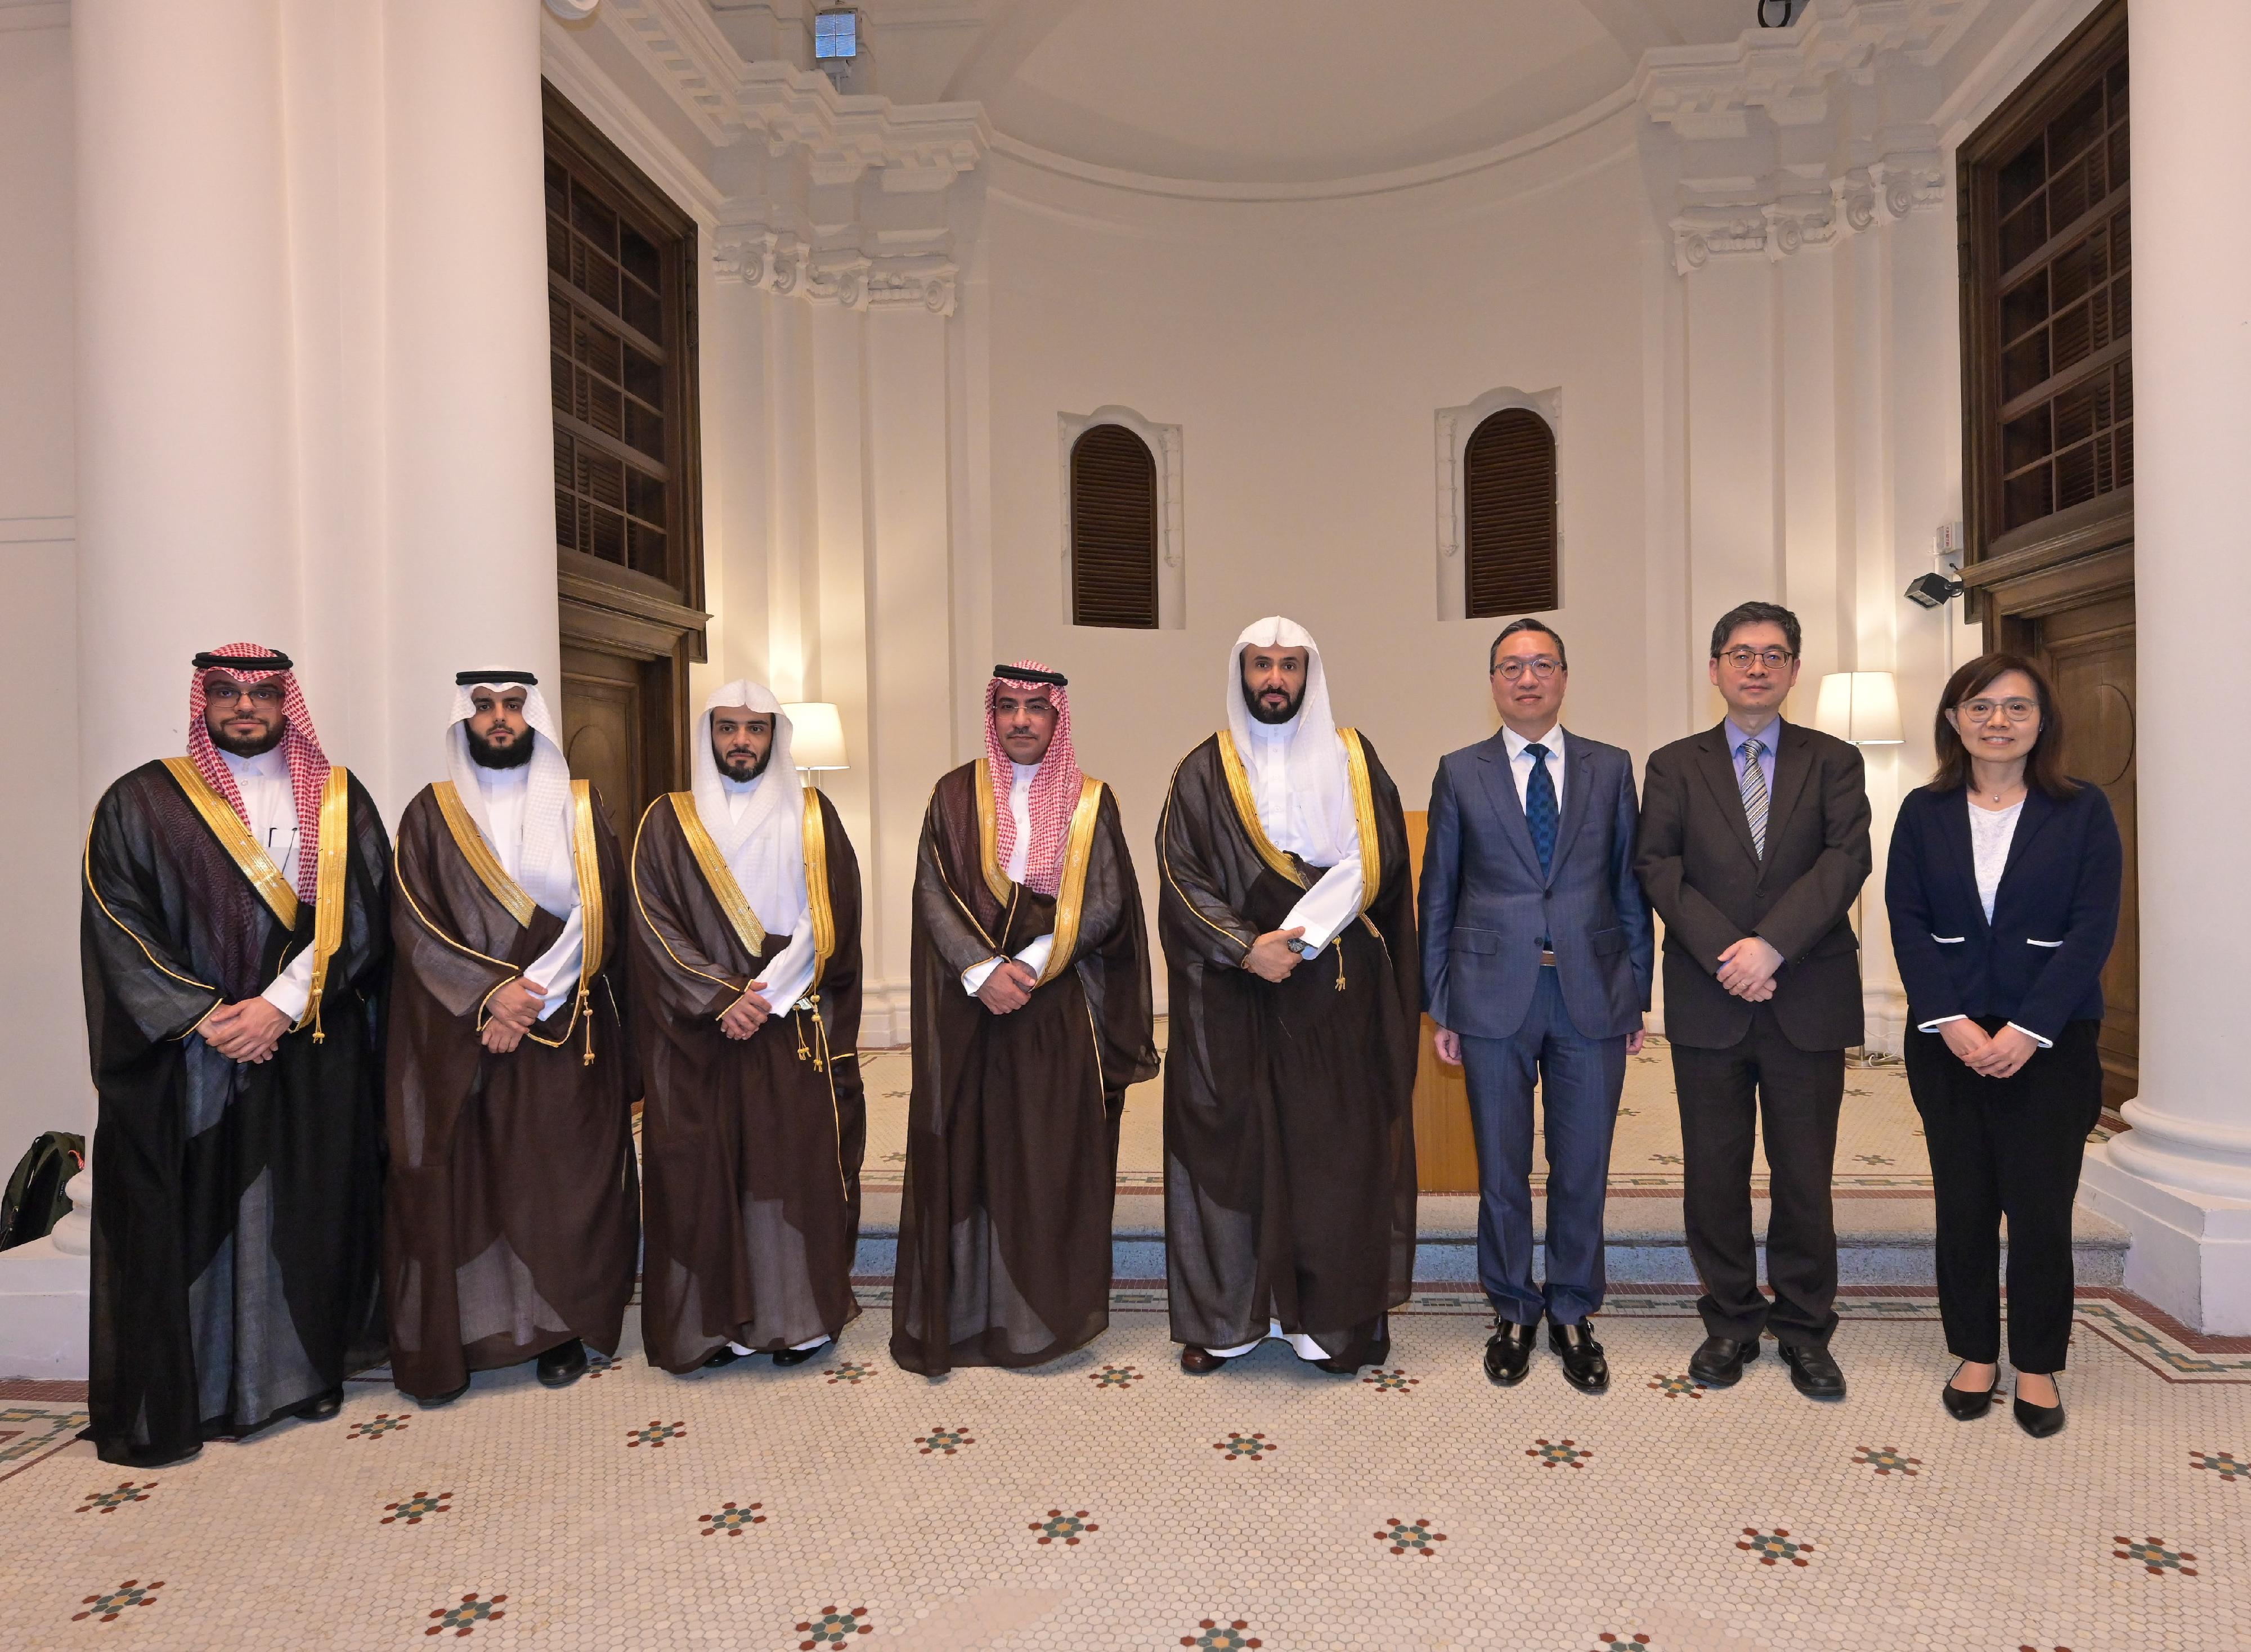 The Department of Justice (DoJ) of the Hong Kong Special Administrative Region and the Ministry of Justice of the Kingdom of Saudi Arabia signed a Memorandum of Understanding of Cooperation today (April 22) to strengthen their co-operation on issues relating to dispute avoidance and resolution. Photo shows the Secretary for Justice, Mr Paul Lam, SC (third right), and the DoJ's Law Officer (International Law), Dr James Ding (second right), pictured with the Minister of Justice of the Kingdom of Saudi Arabia, Dr Waleed Mohammed Alsmani (fourth right); the Consul General of Saudi Arabia in Hong Kong, Mr Hamad Aljebreen (fourth left), and representatives of both sides at the signing ceremony. 
